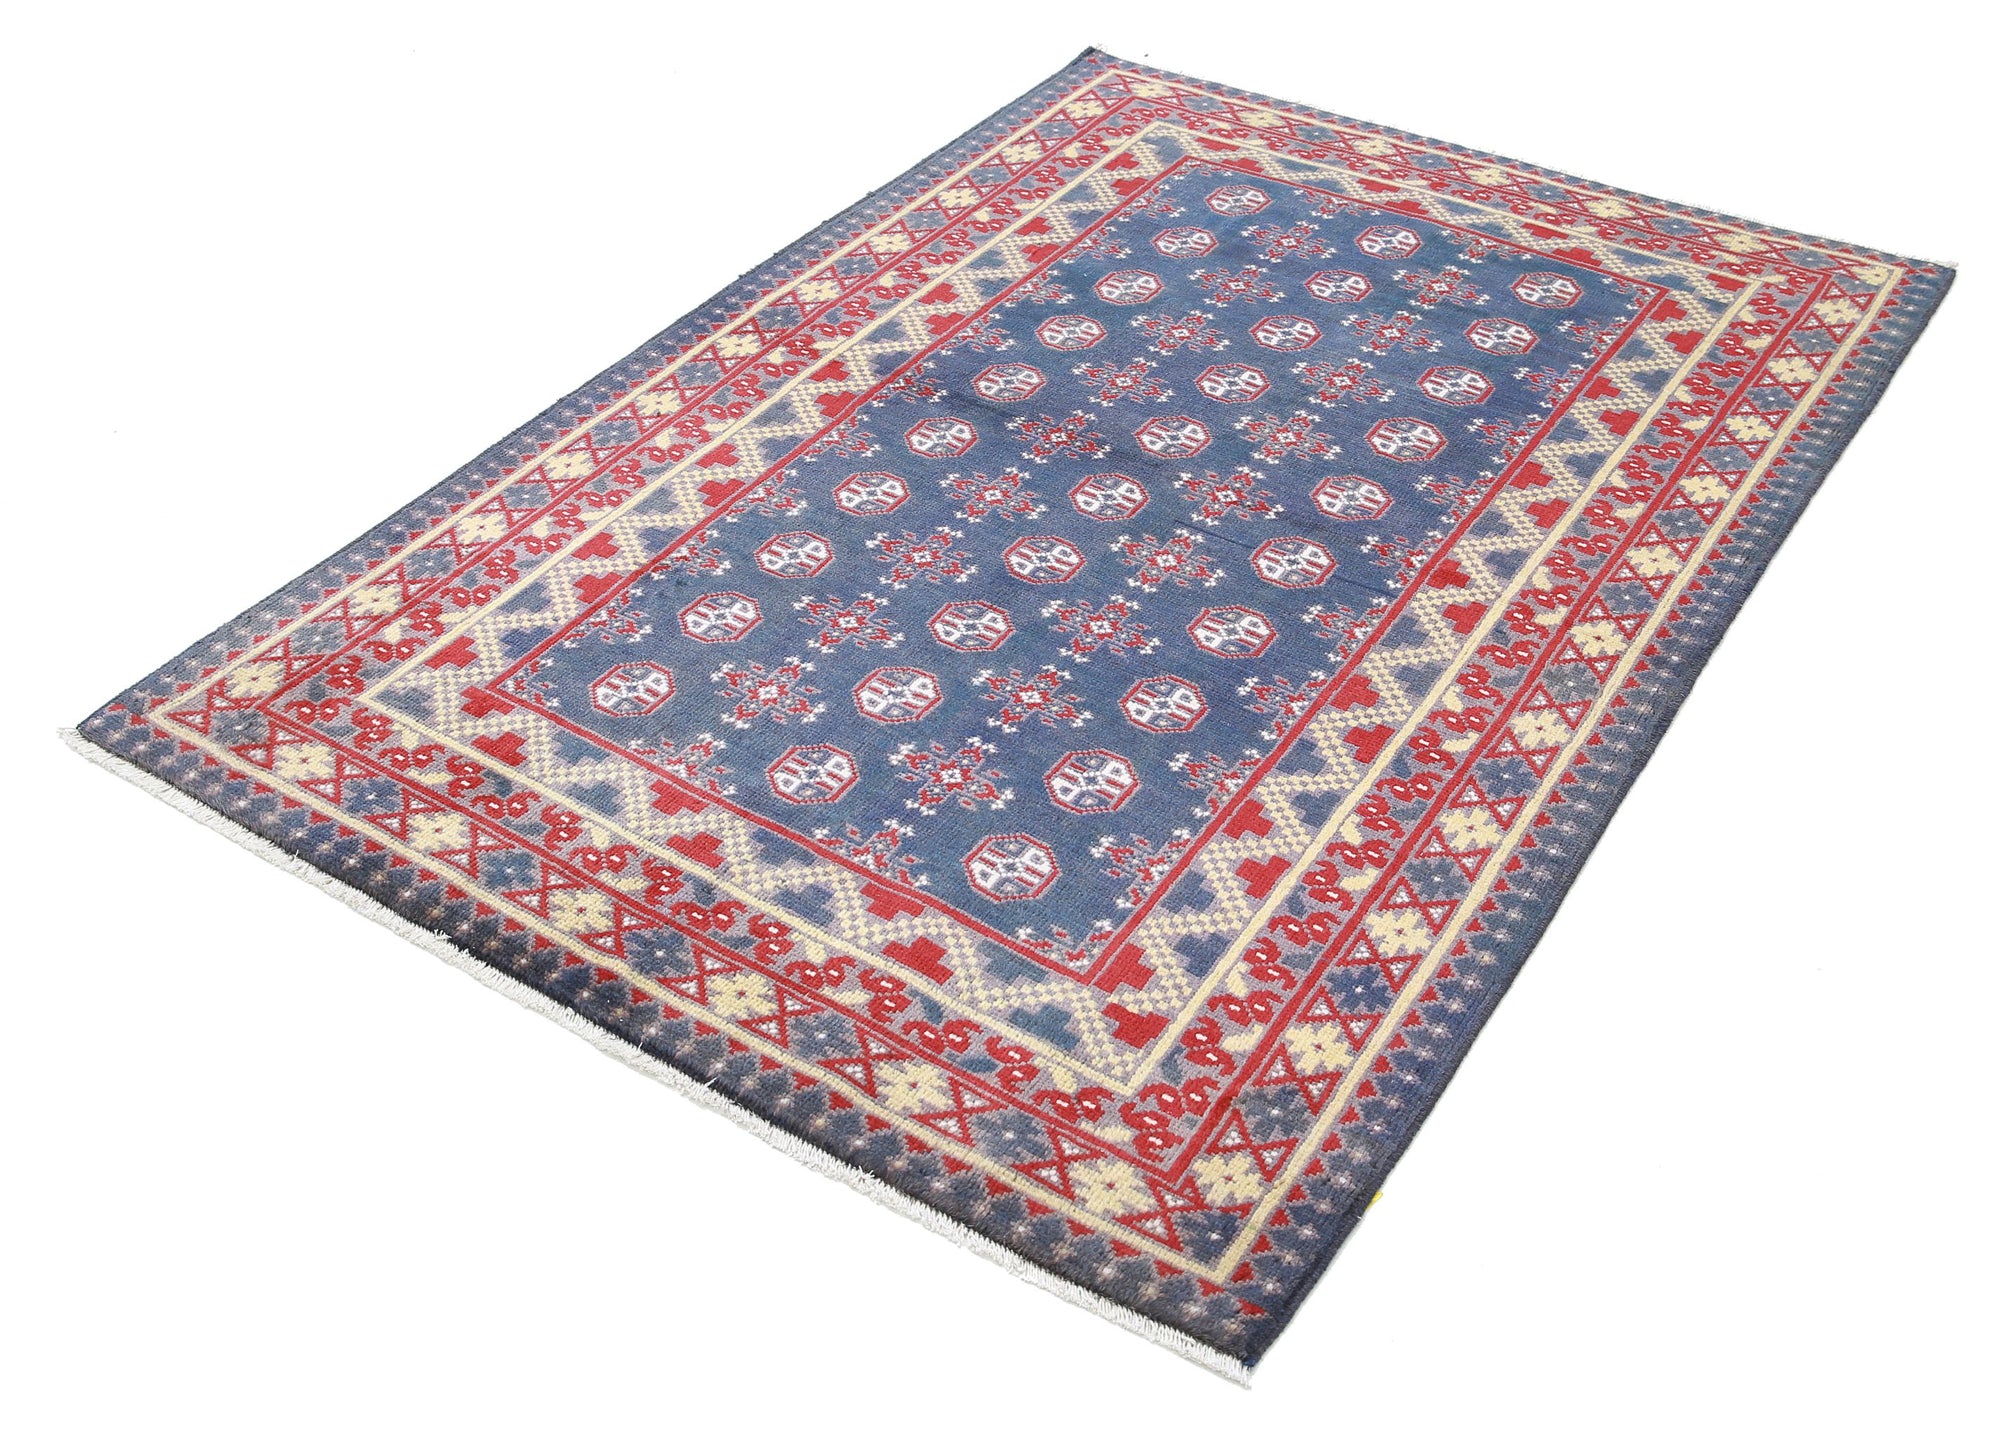 Revival-hand-knotted-gul-collection-wool-rug-5013921-2.jpg